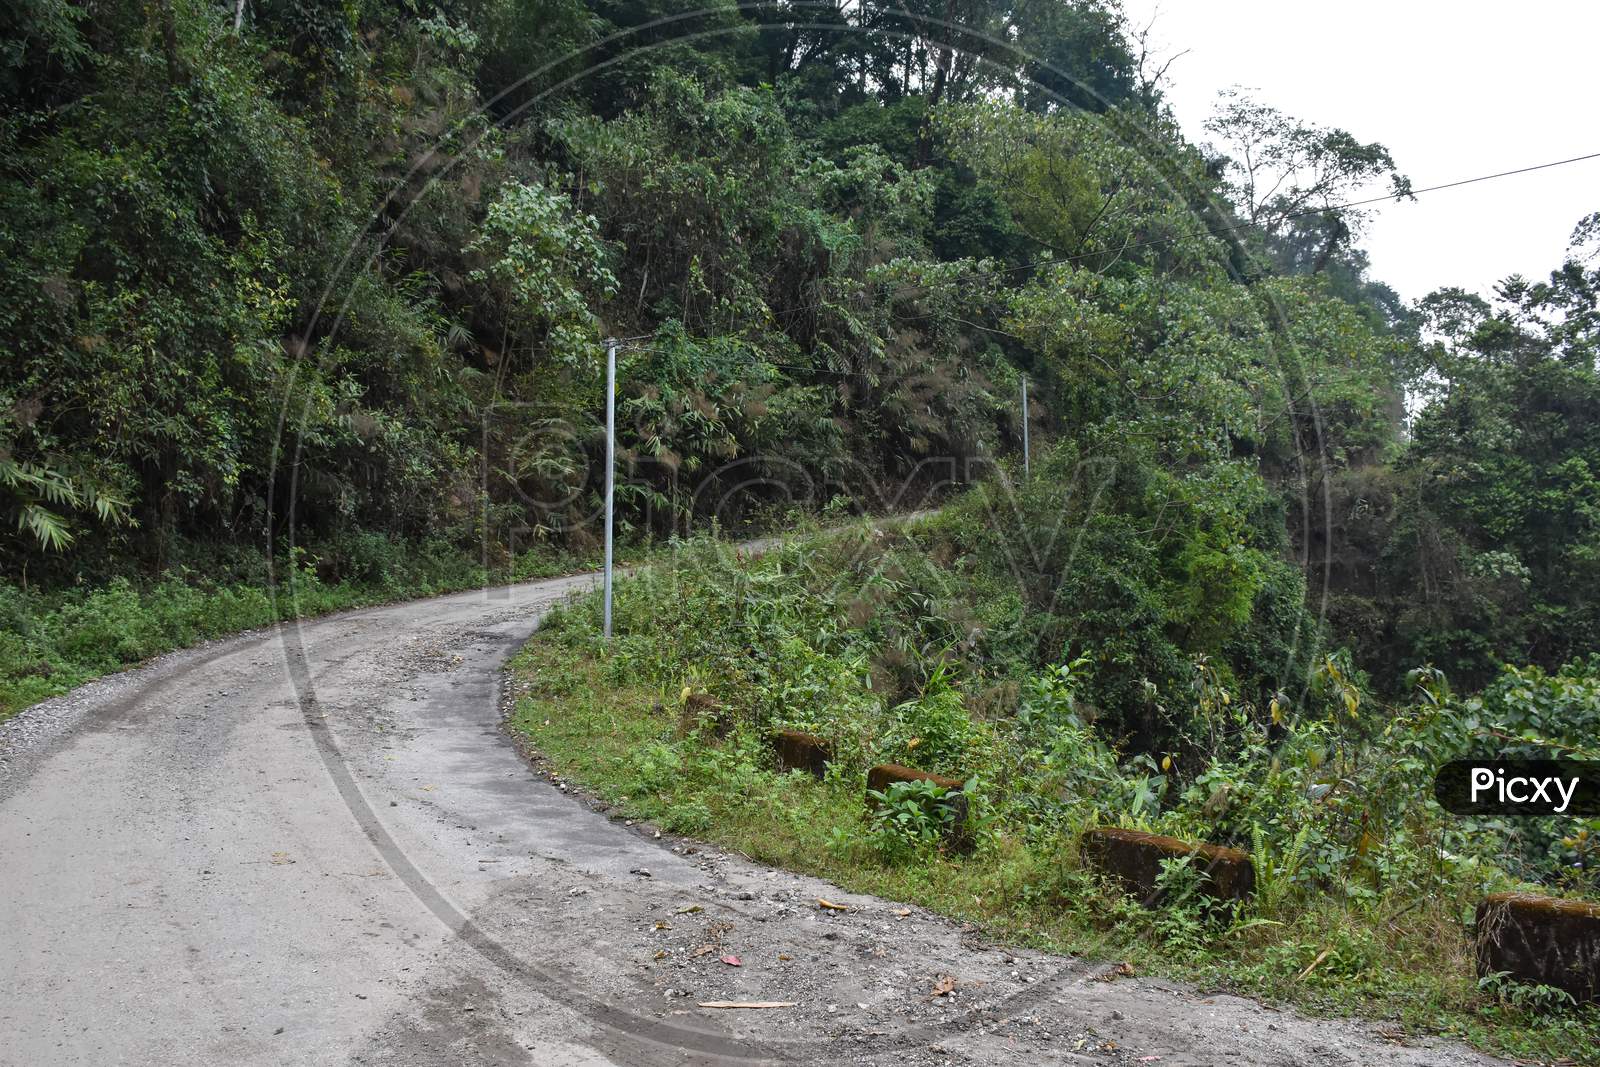 A Curved Asphalt Road In The Hilly Forest.